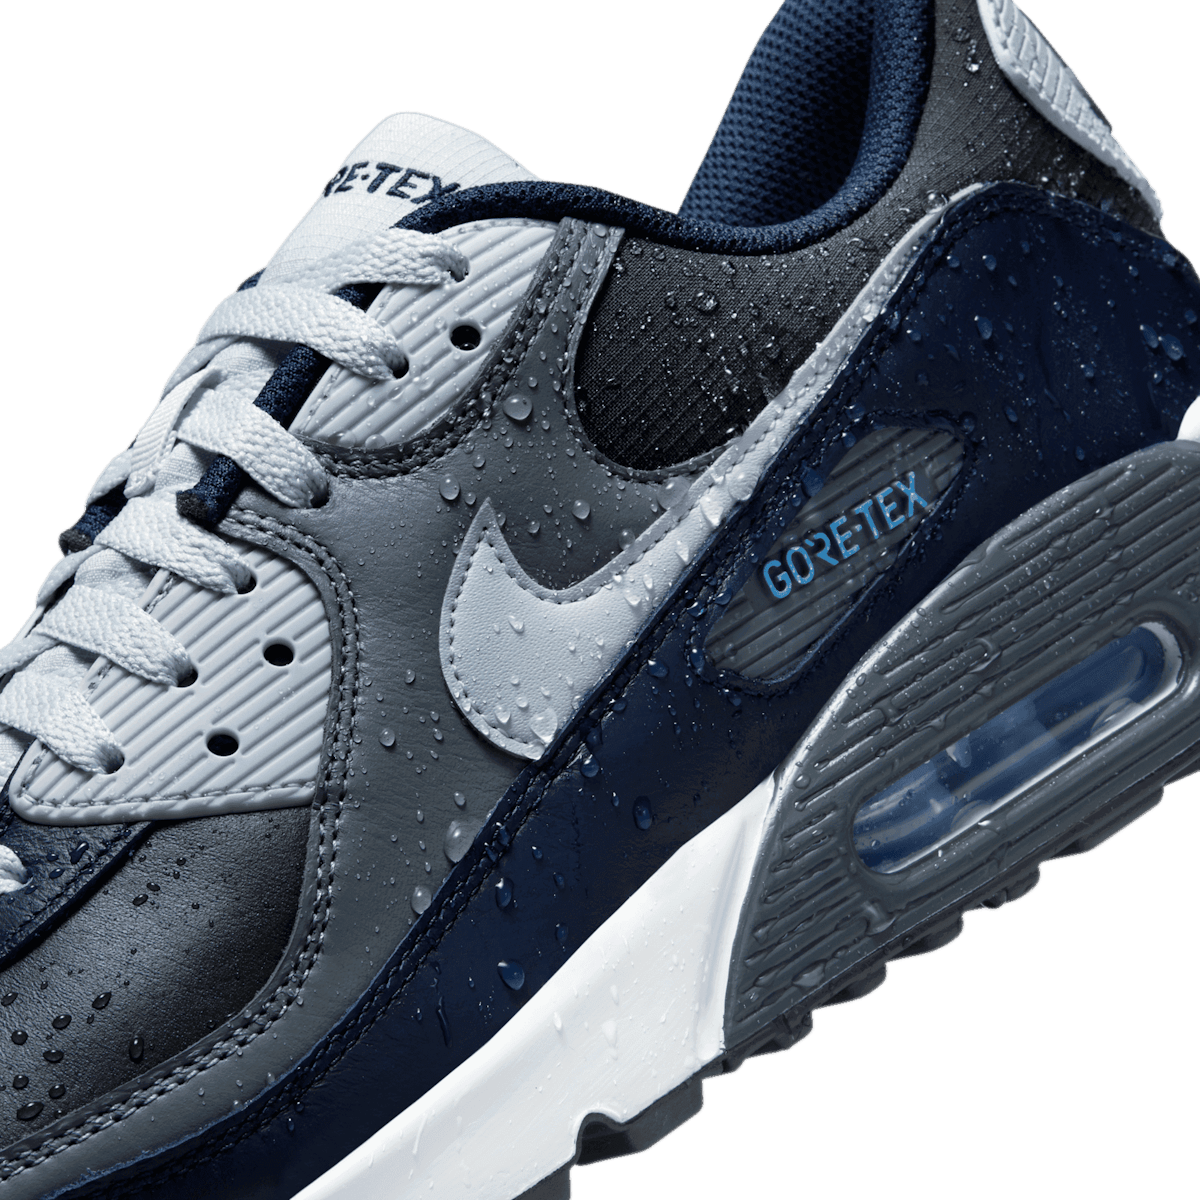 Nike Air Max 90 Gore-Tex Anthracite Obsidian Angle 6